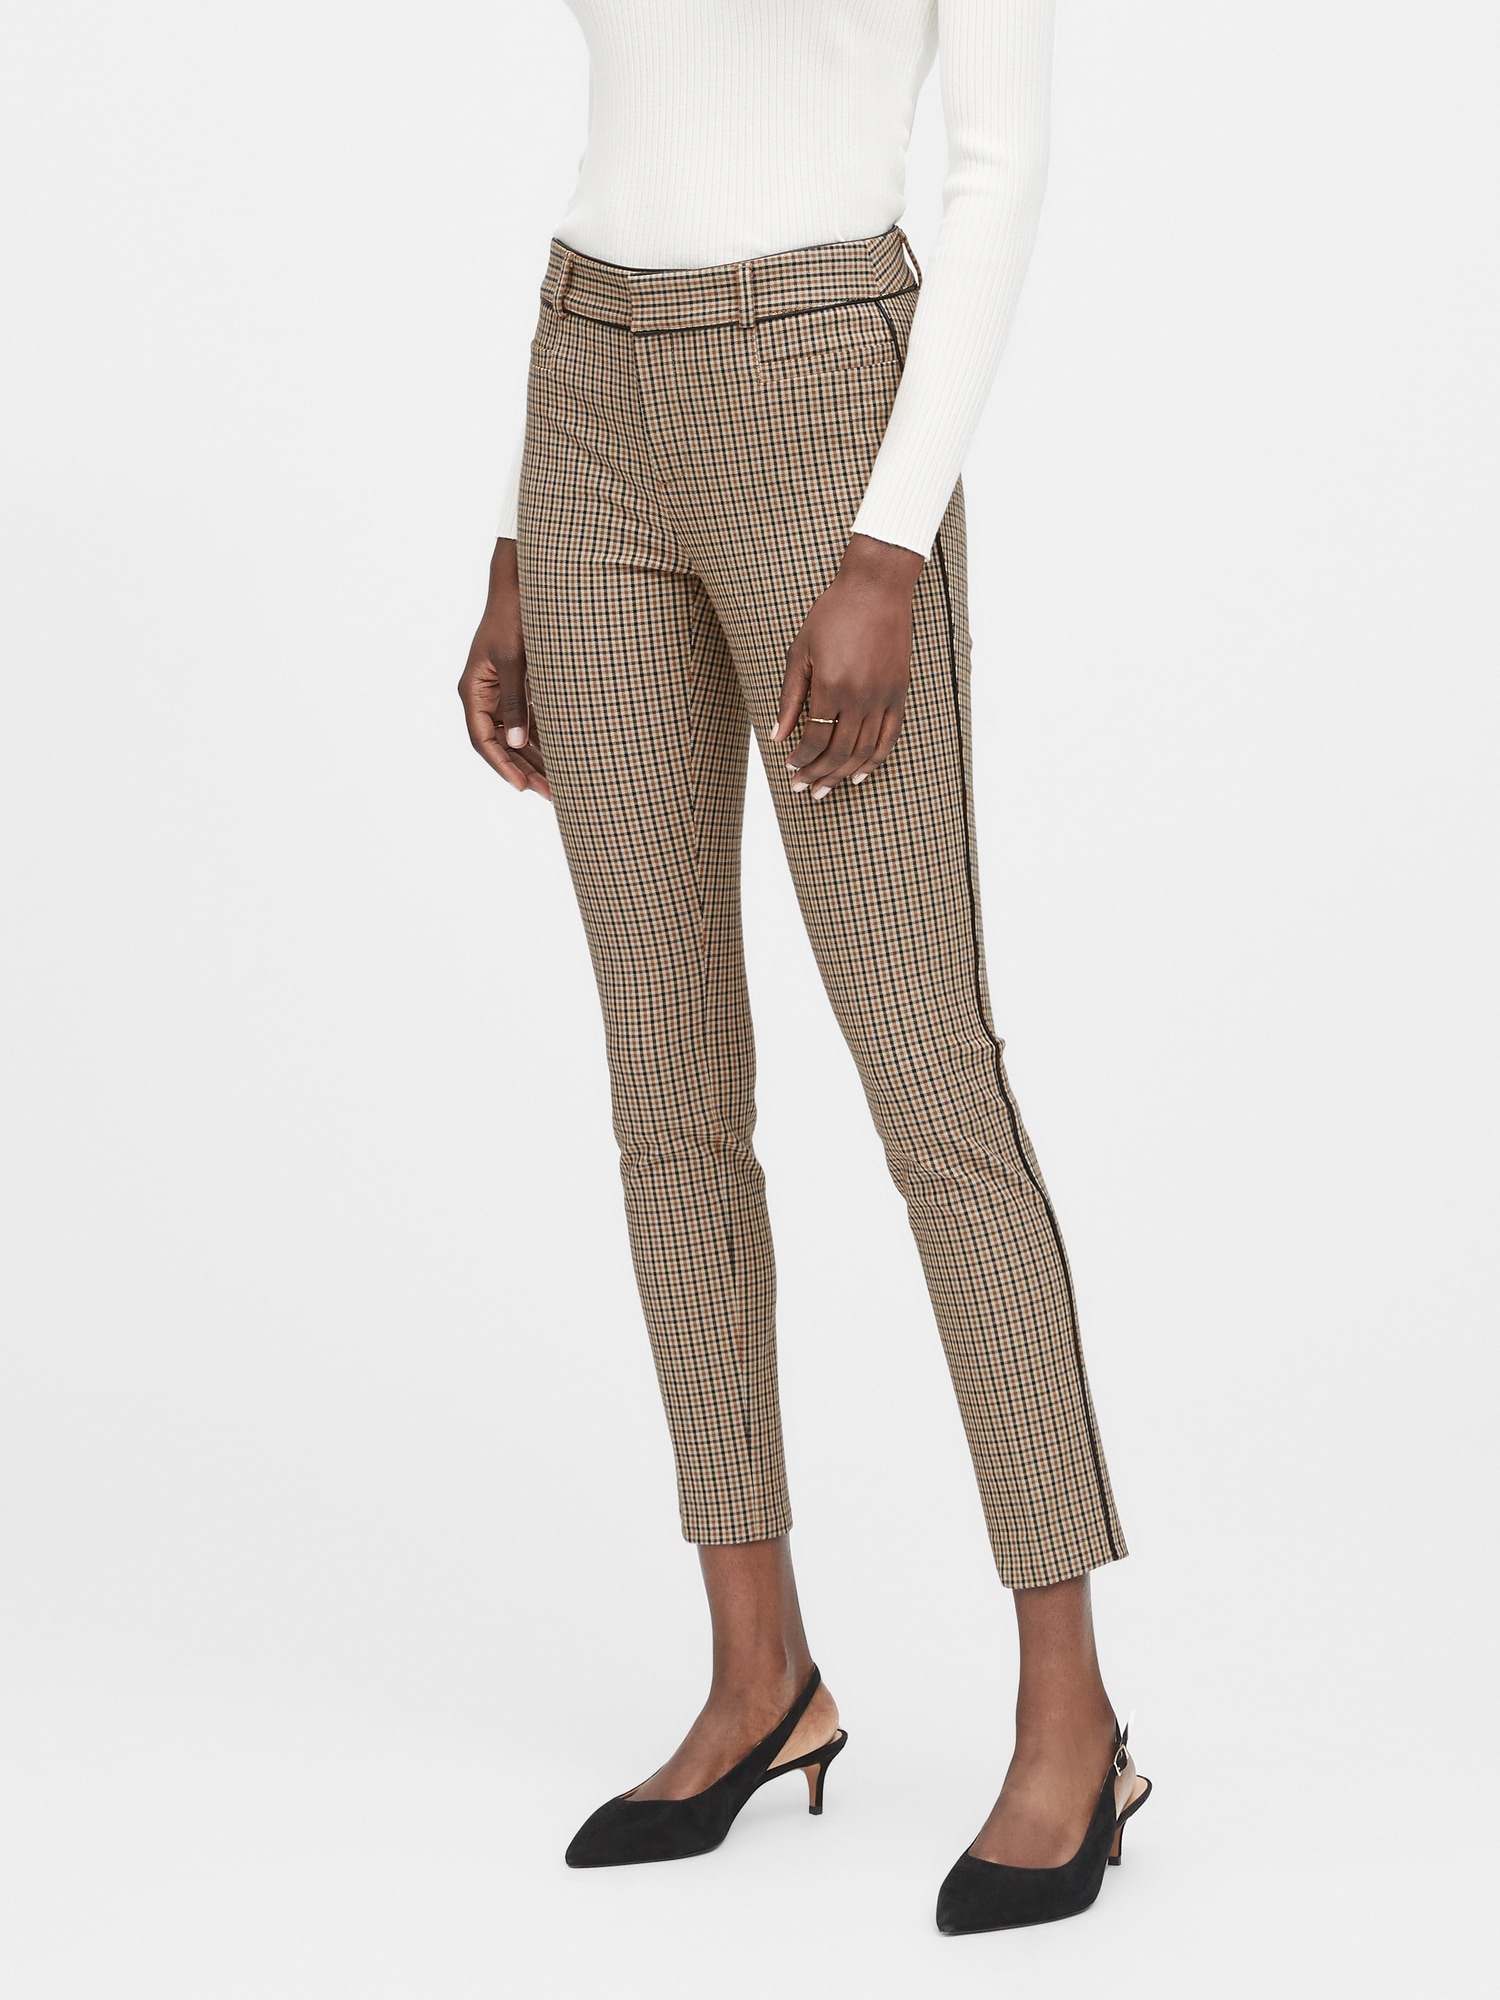 Petite Modern Sloan Skinny-Fit Pant with Piping